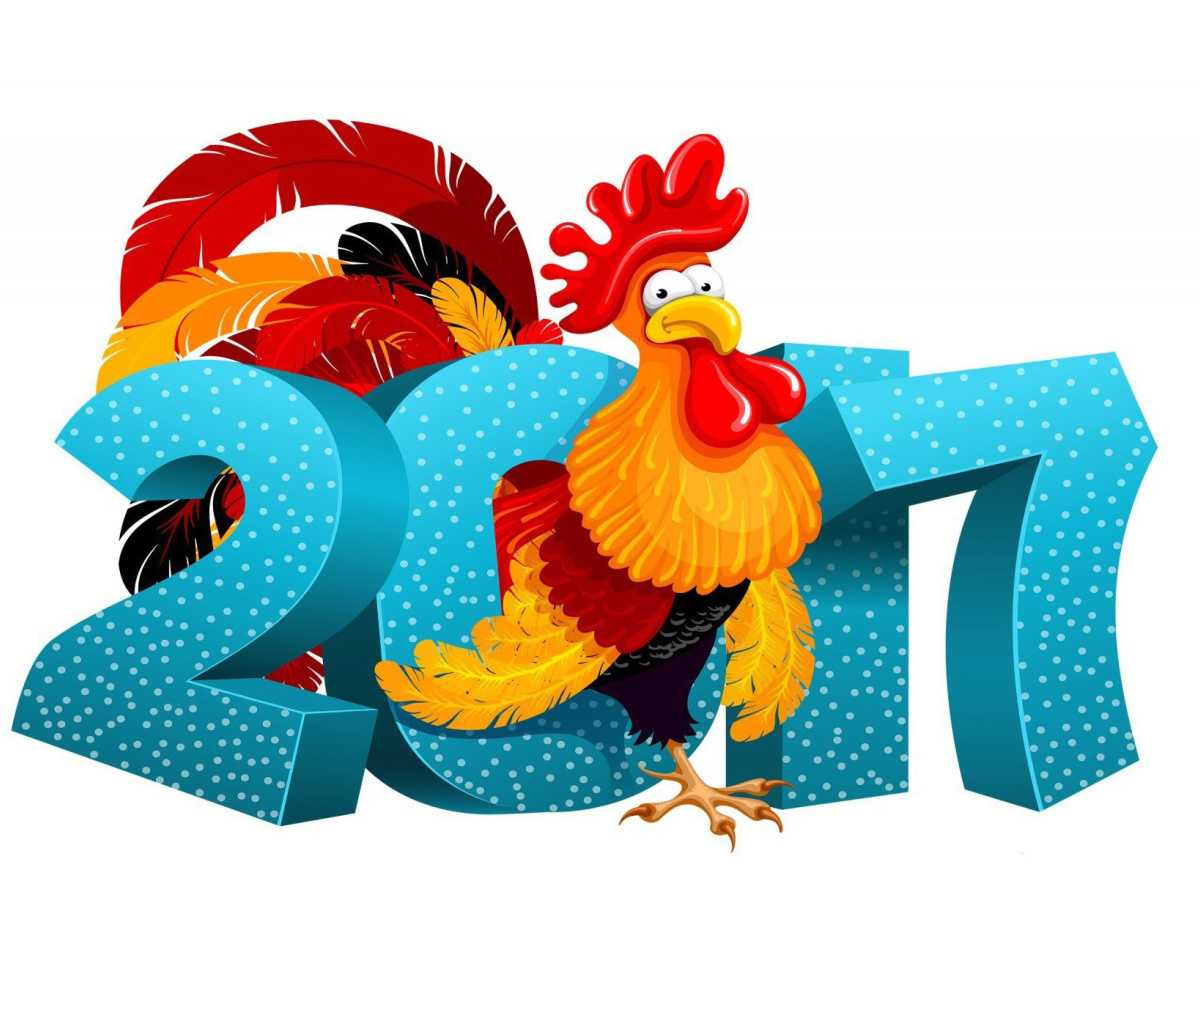 2017 New Year Chinese Horoscope Red Cock Rooster wallpaper 1200x1024